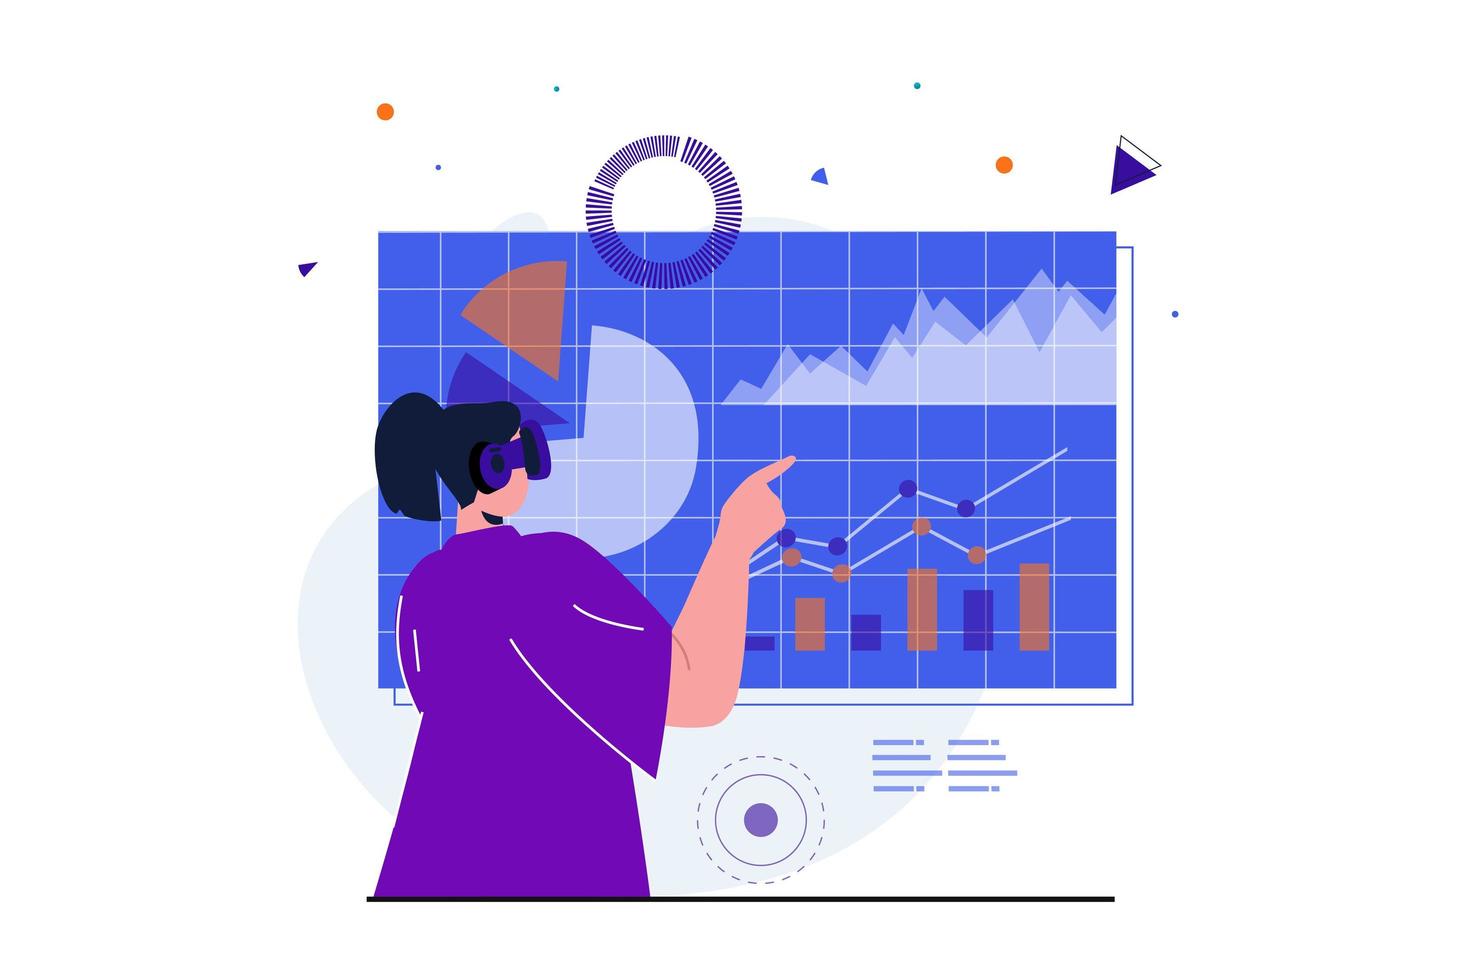 Cyberspace modern flat concept for web banner design. Woman in VR headset interacts with data graph and analysis tools in simulated workspace dashboard. Vector illustration with isolated people scene